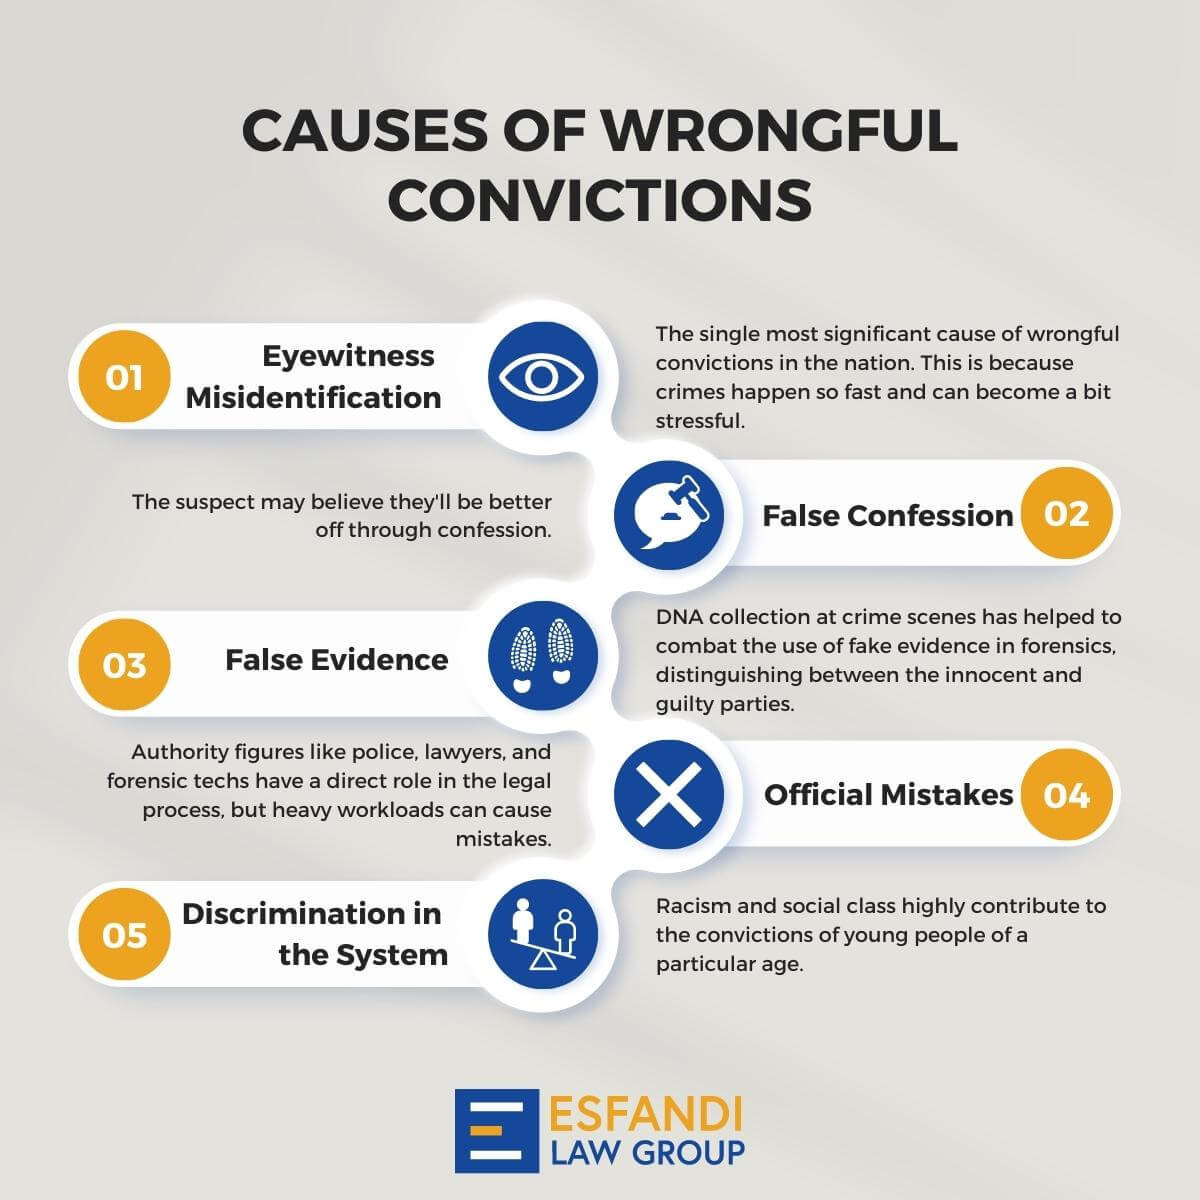 Common Causes of Wrongful Convictions